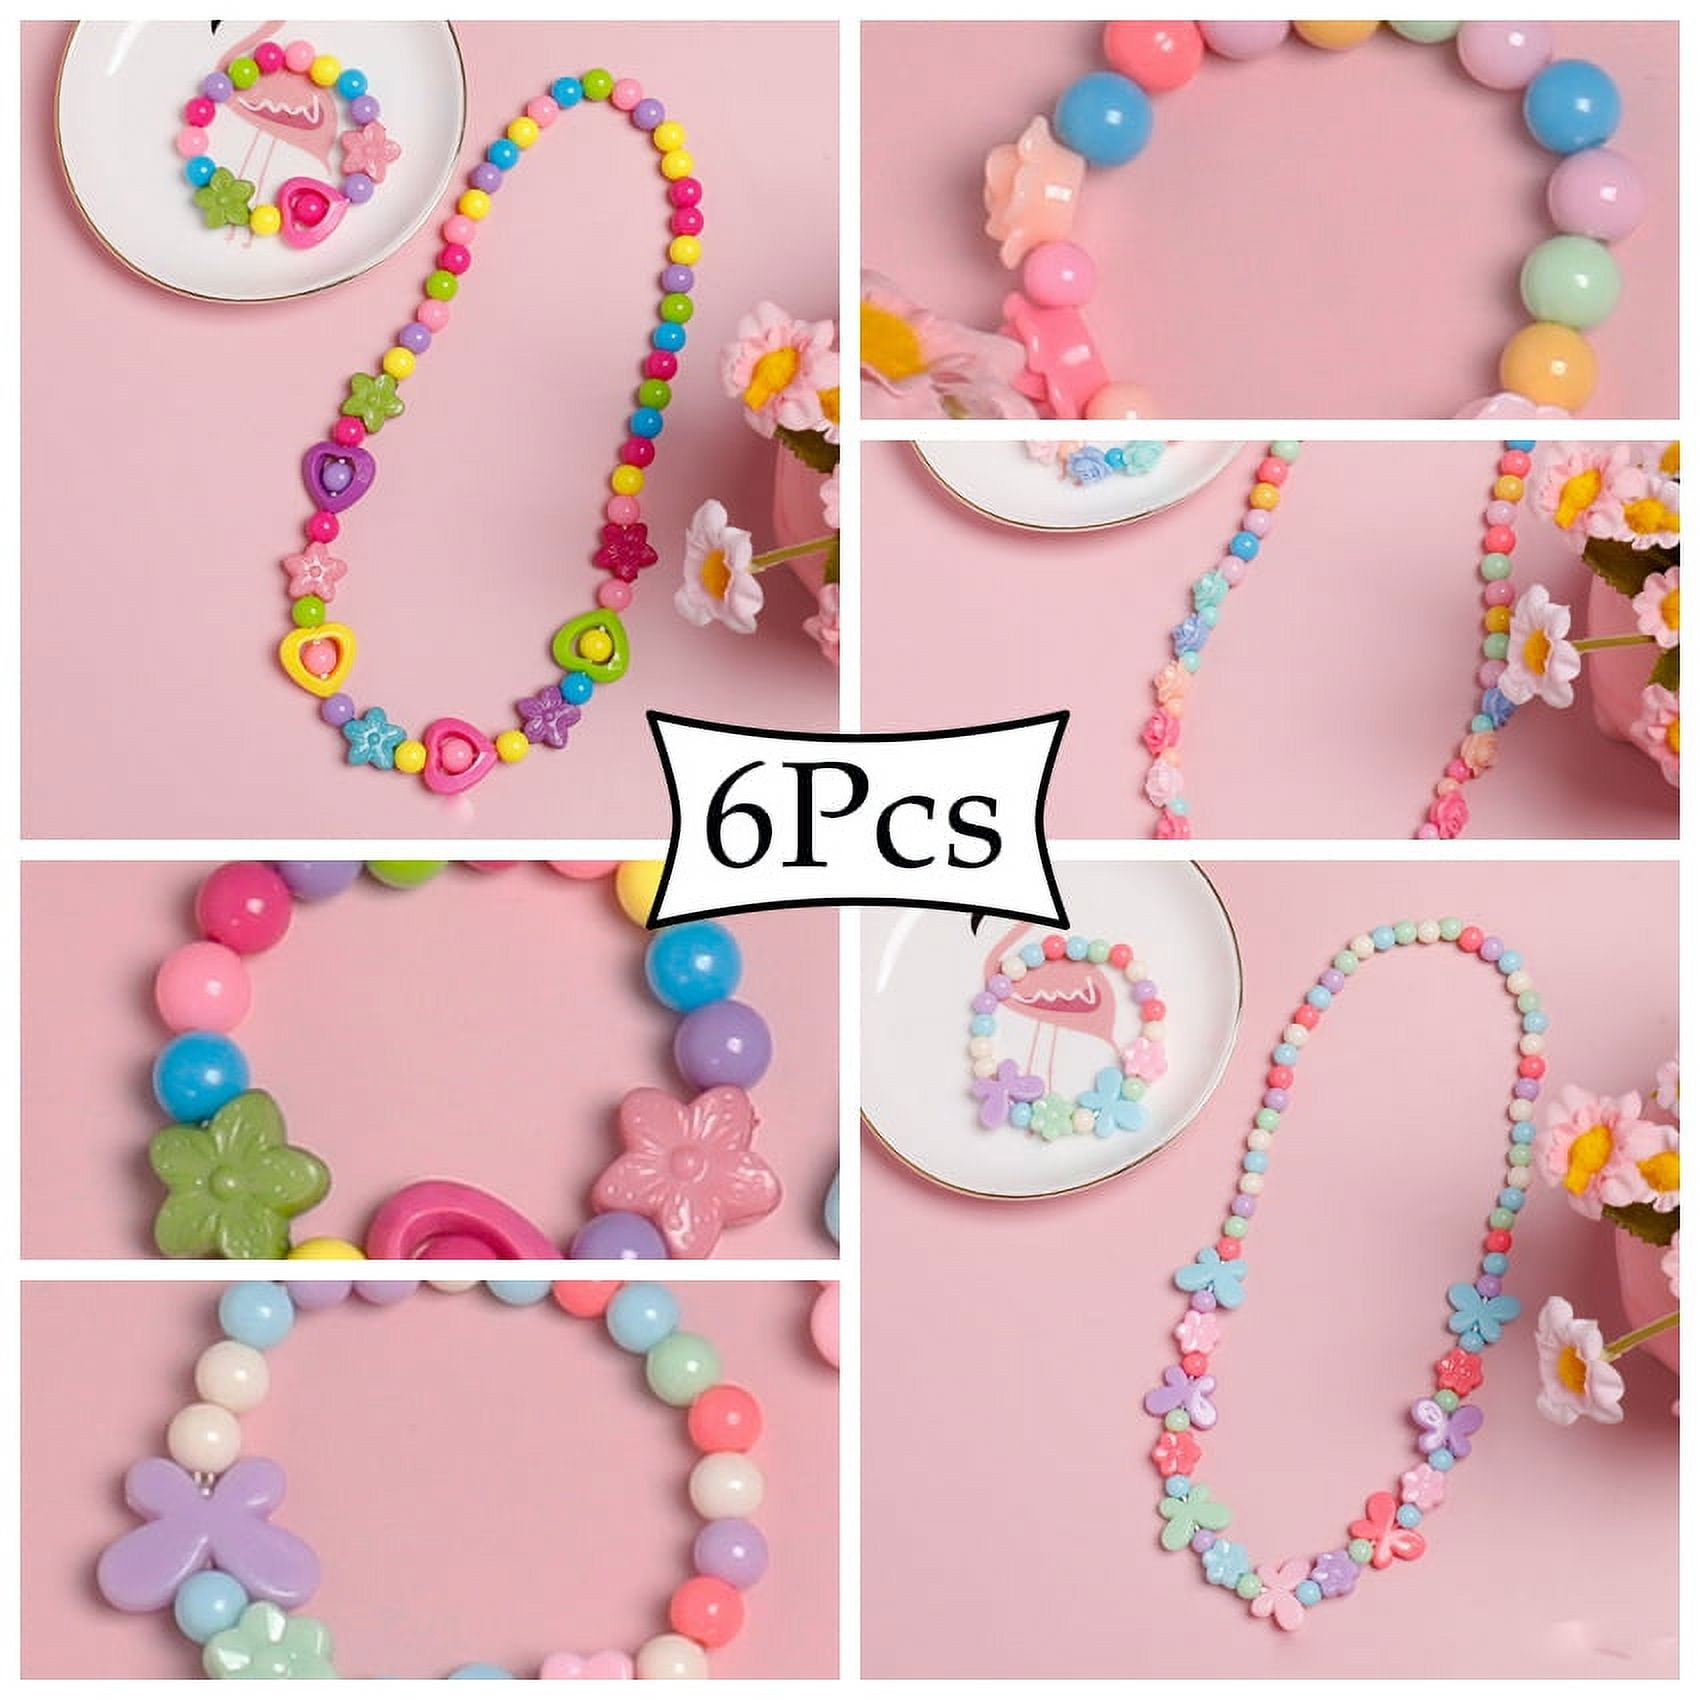 Homaful Little Girls Necklace BraceletSet, 12 Pcs Kids Lovely Beaded  Necklace and Bracelet Colorful Beads Jewelry Princess Dress up for Toddlers  Kids 3 4 5 6 Year Old Gift Pretend Play Party Favors 